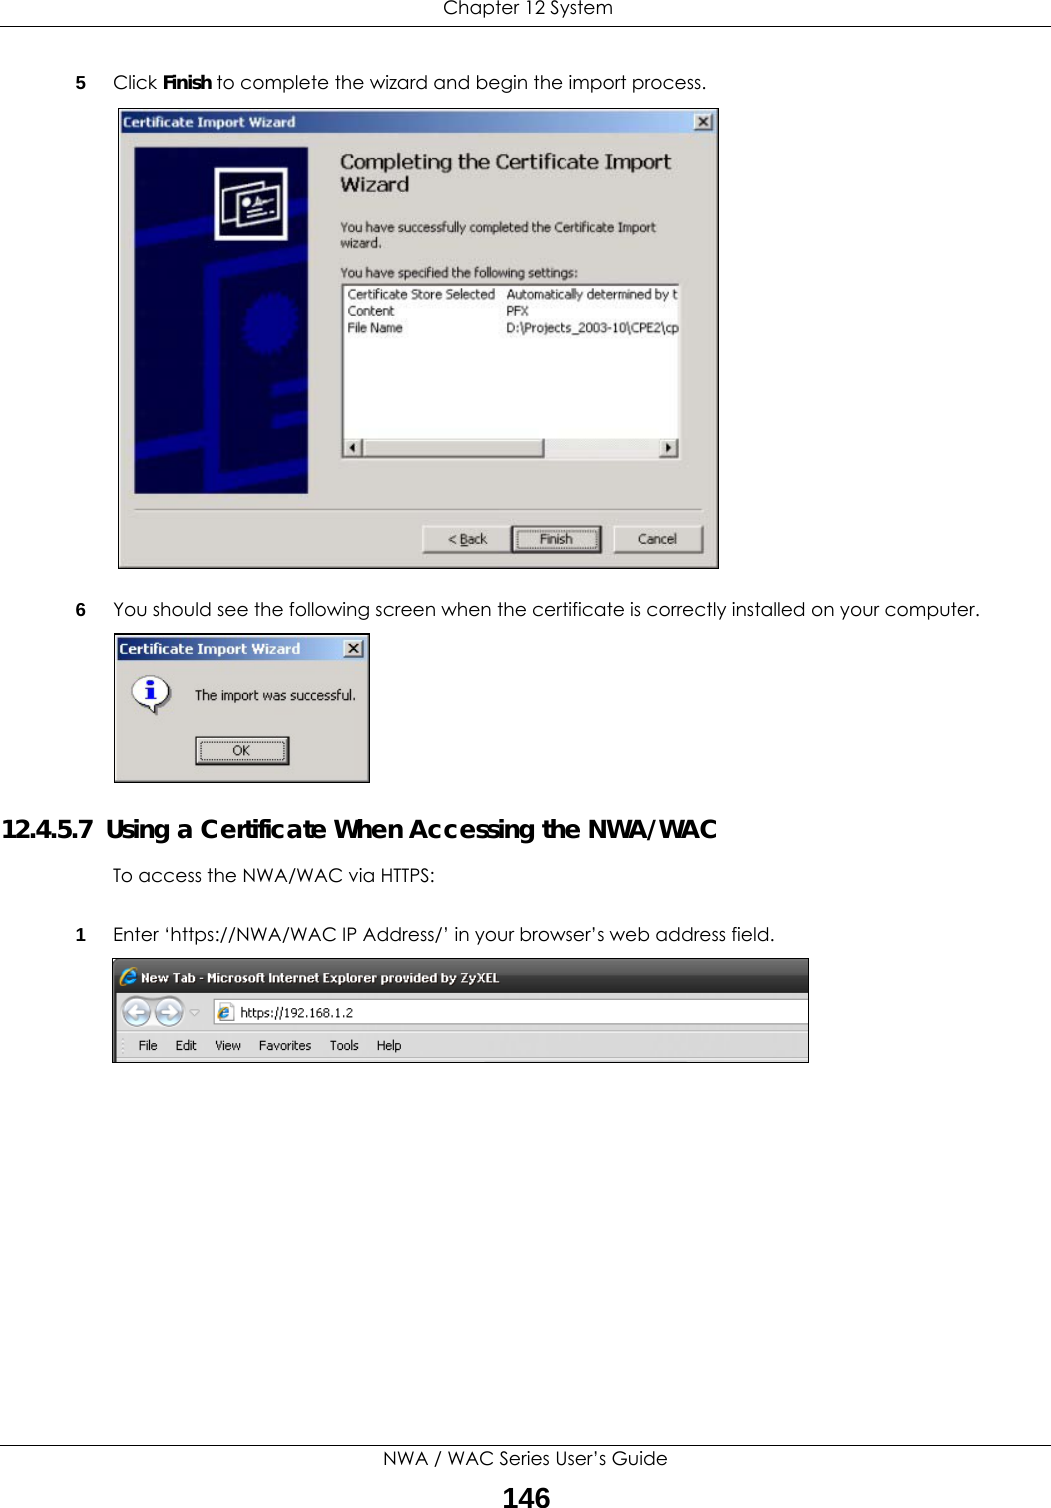  Chapter 12 SystemNWA / WAC Series User’s Guide1465Click Finish to complete the wizard and begin the import process.6You should see the following screen when the certificate is correctly installed on your computer. 12.4.5.7  Using a Certificate When Accessing the NWA/WACTo access the NWA/WAC via HTTPS:1Enter ‘https://NWA/WAC IP Address/’ in your browser’s web address field.